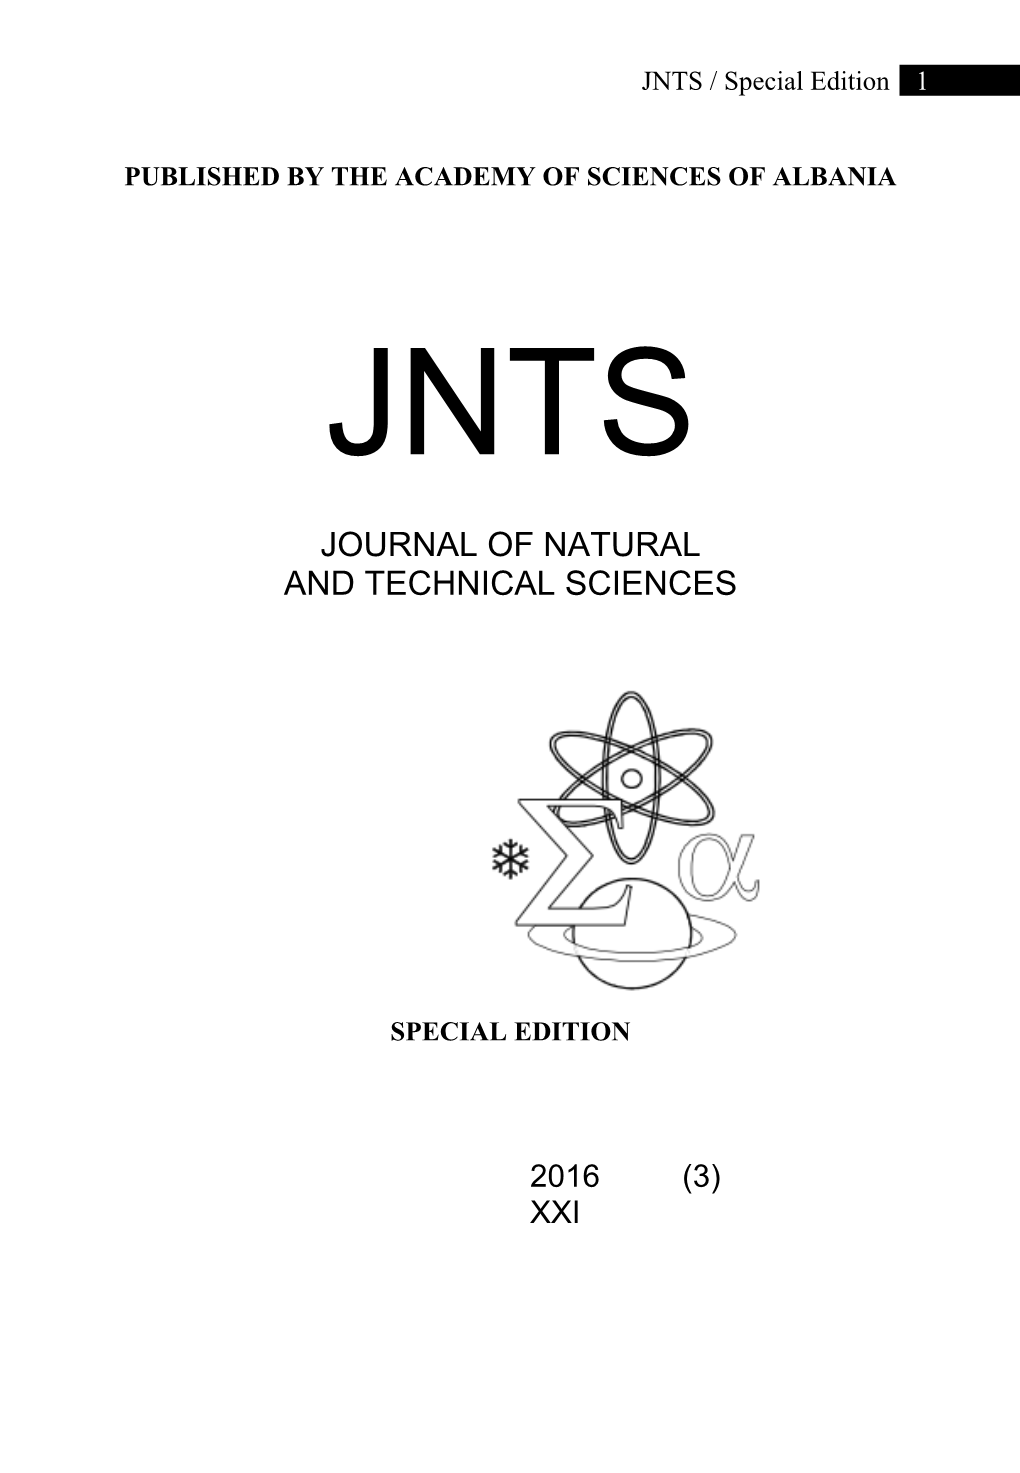 Journal of Natural and Technical Sciences